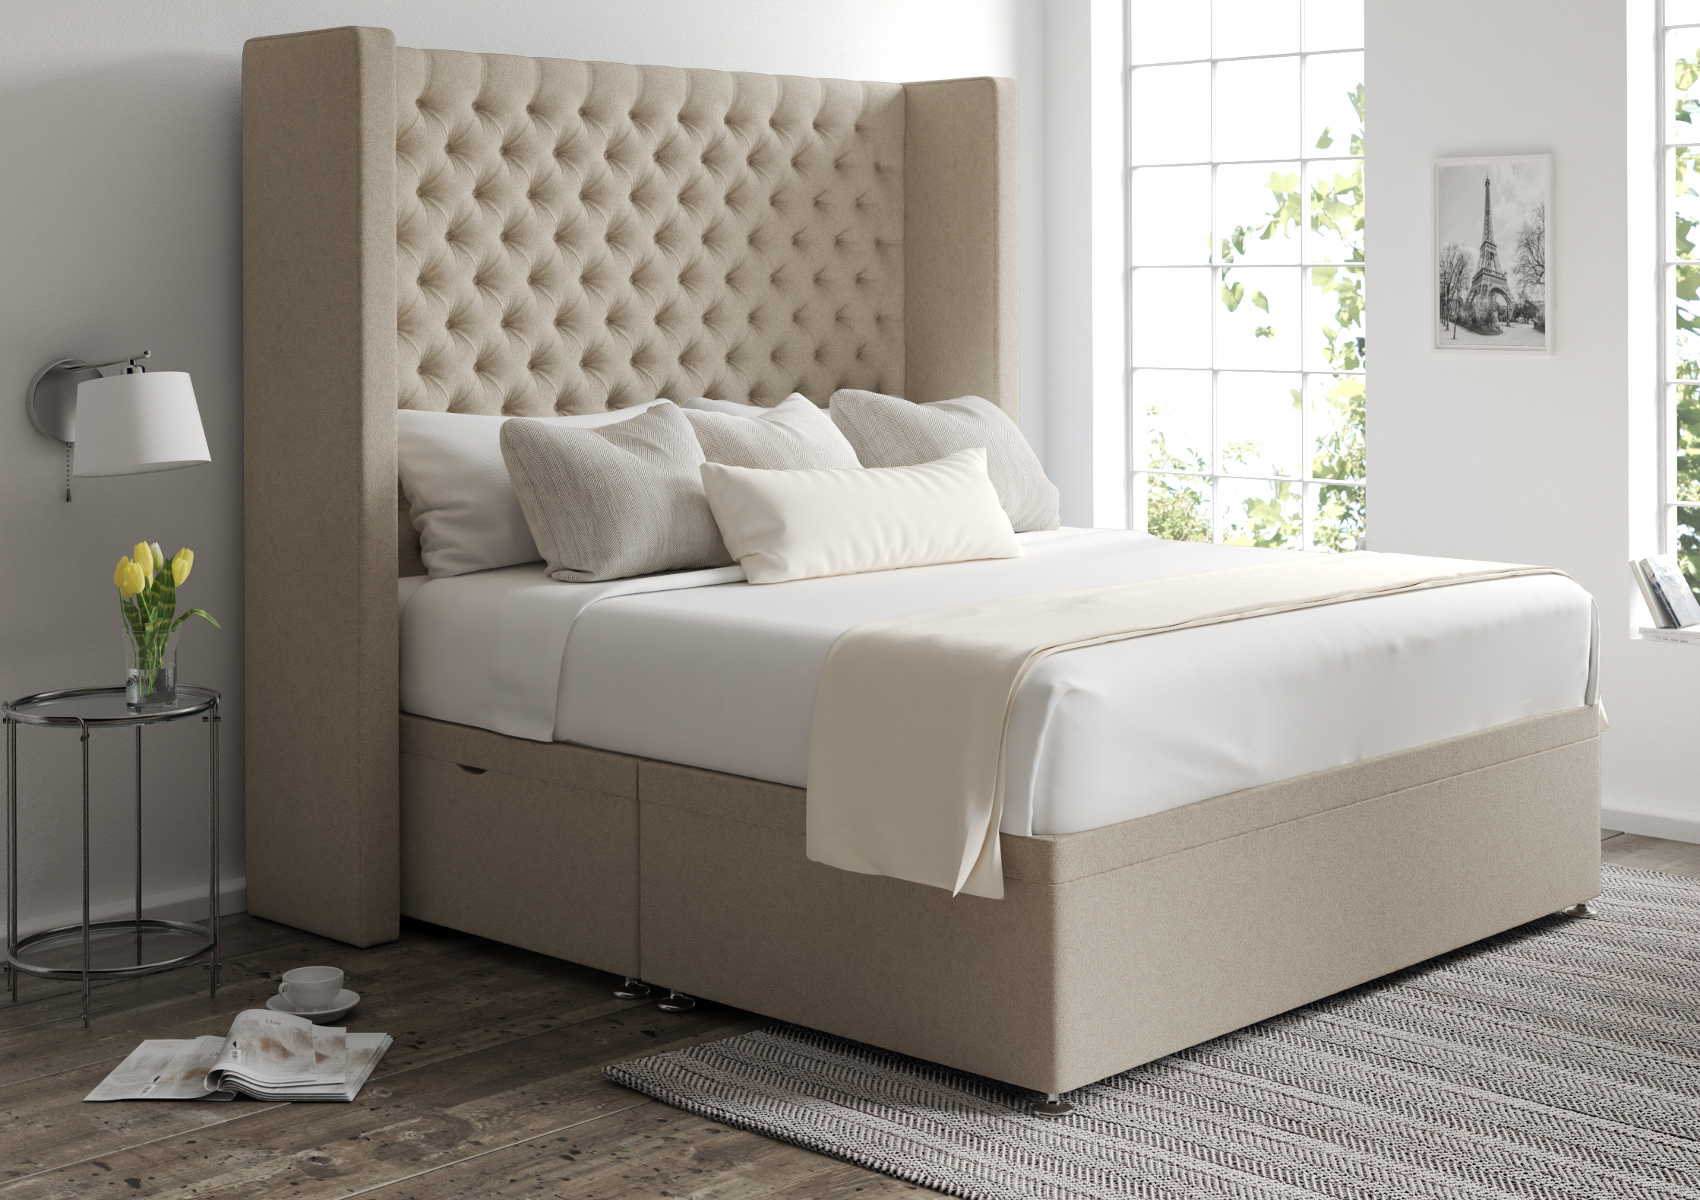 View Emma Arran Cyan Upholstered King Size Ottoman Bed Time4Sleep information